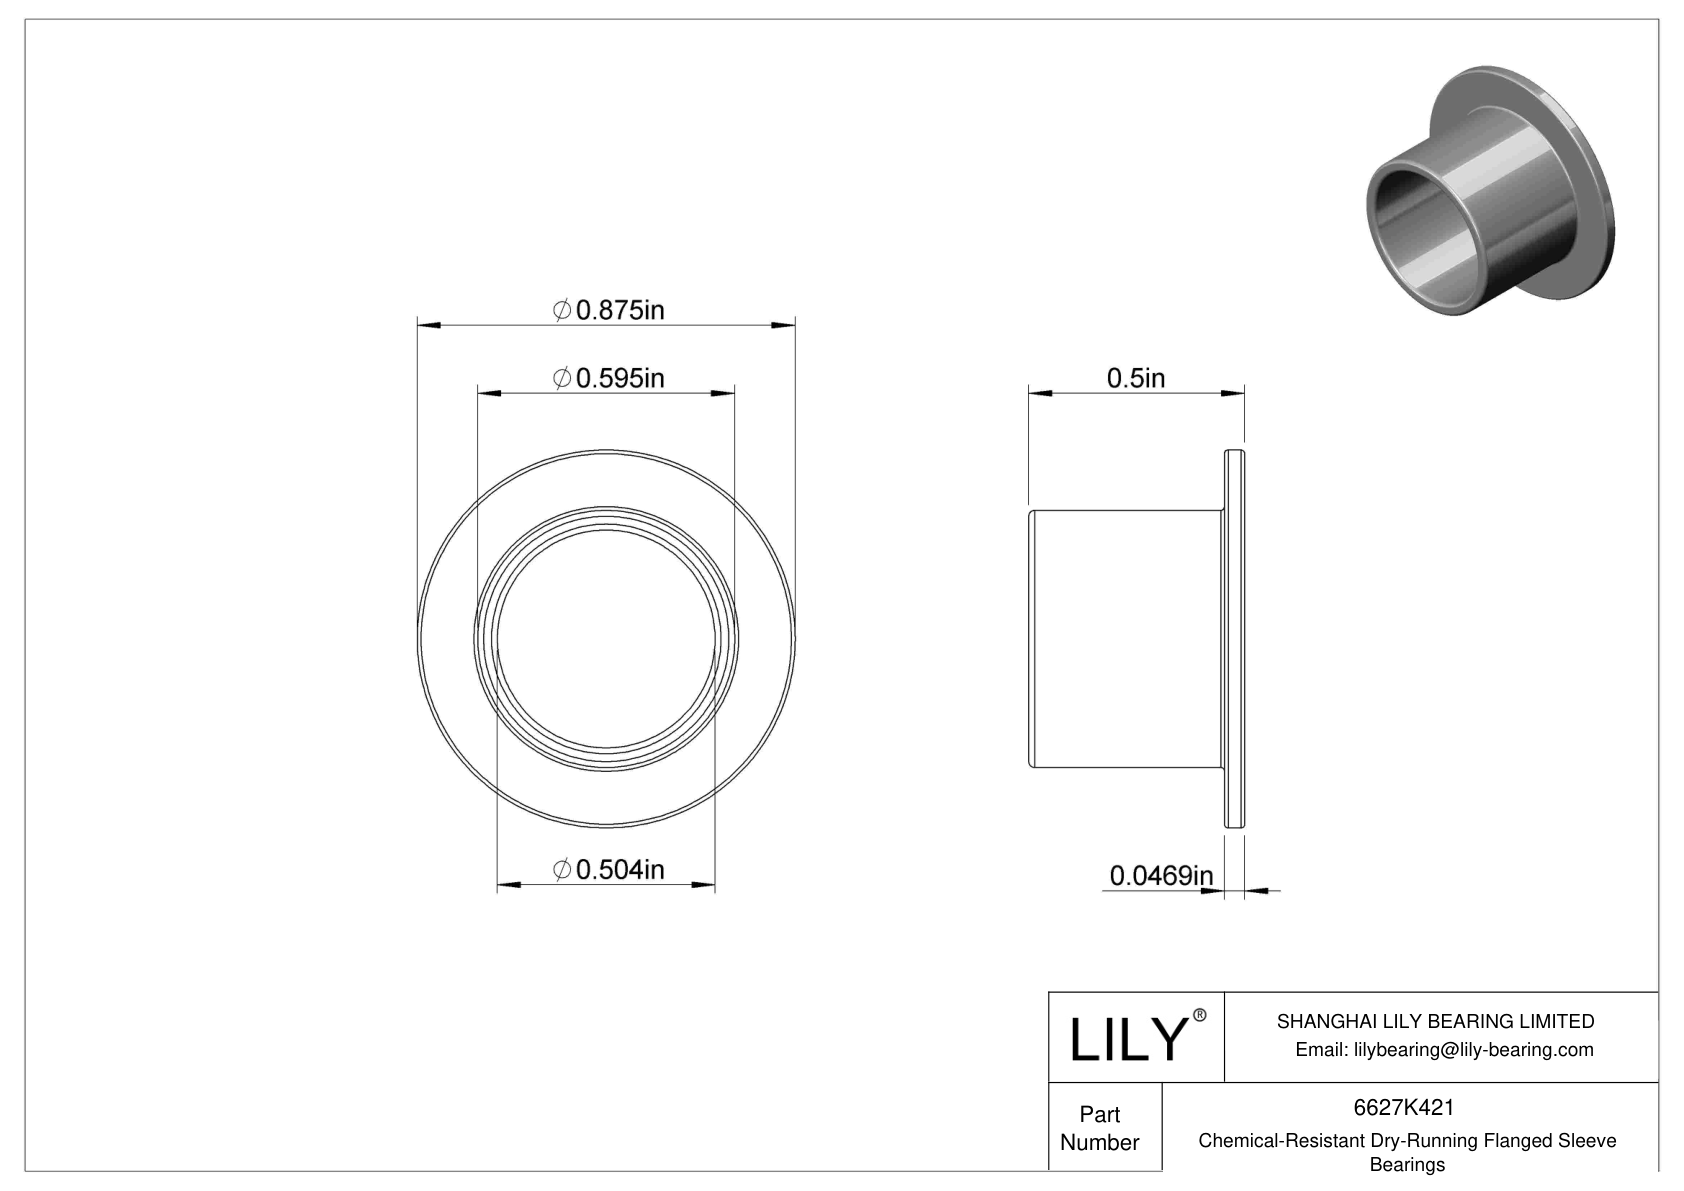 GGCHKECB Chemical-Resistant Dry-Running Flanged Sleeve Bearings cad drawing